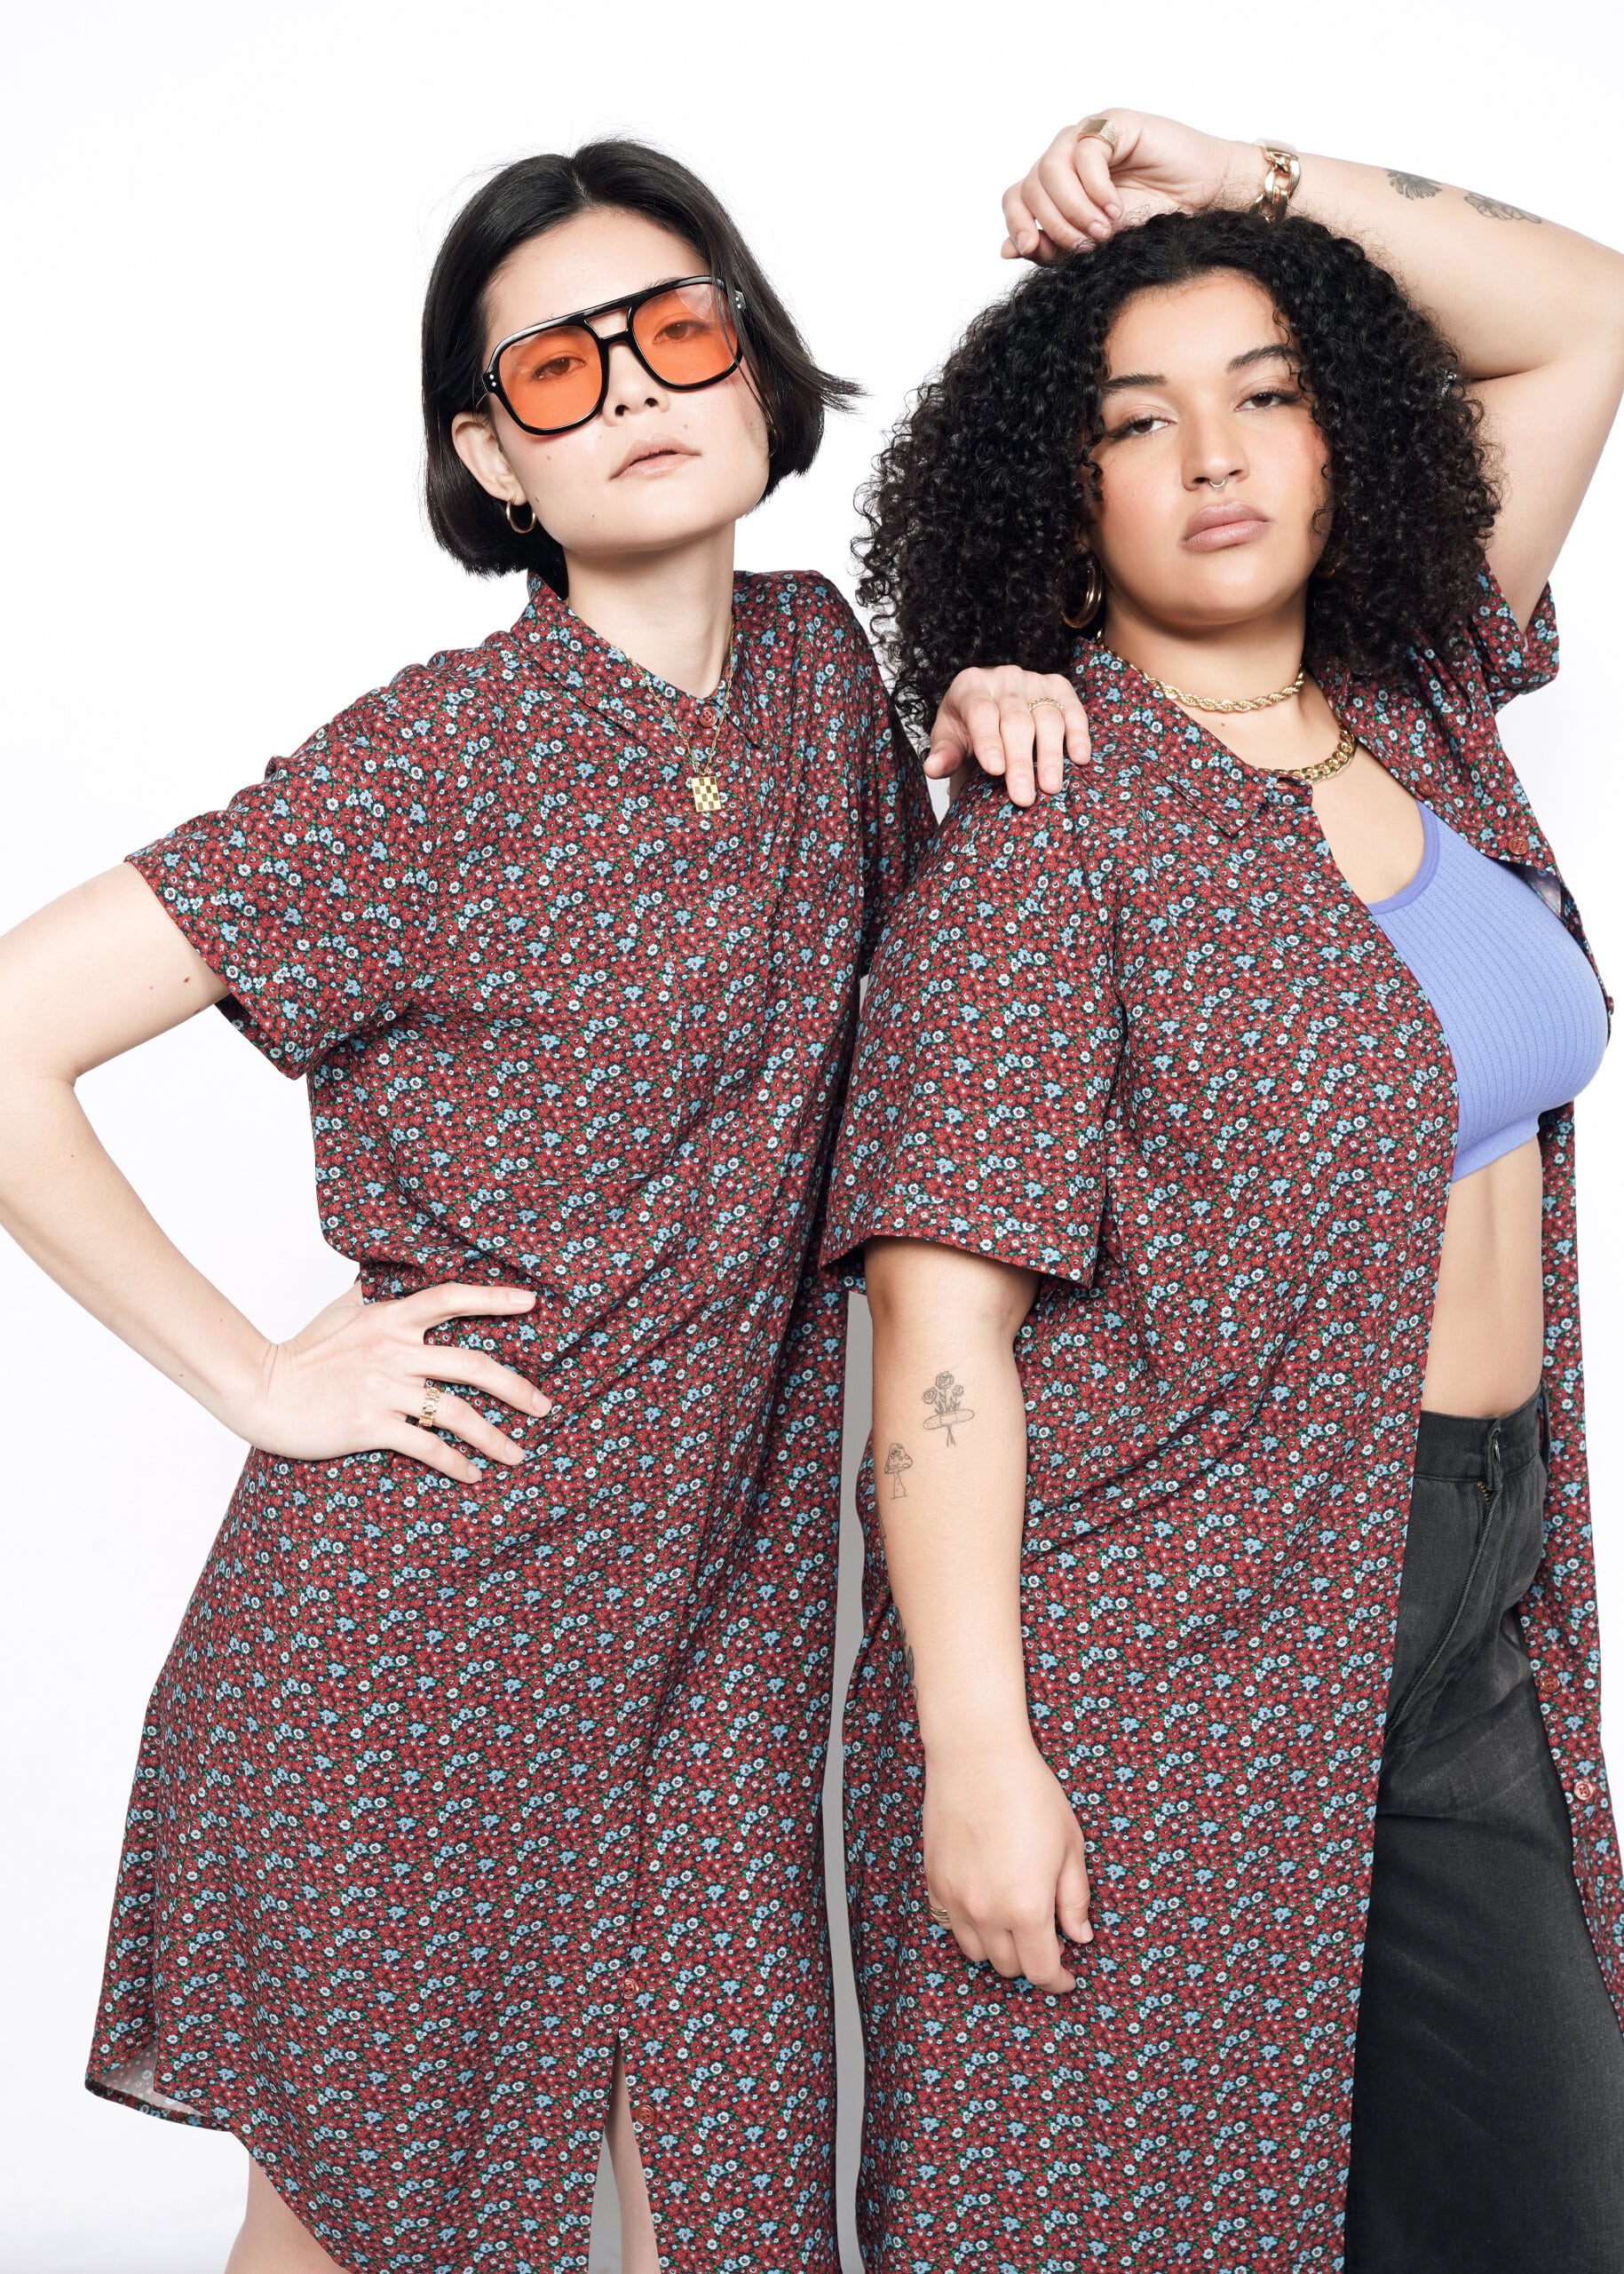 2 Models wearing the Empower Short Sleeve Shirt Dress in Floral Cinnamon. One in size S, with sunglasses. One in size 1X with a purple bra and black pants.